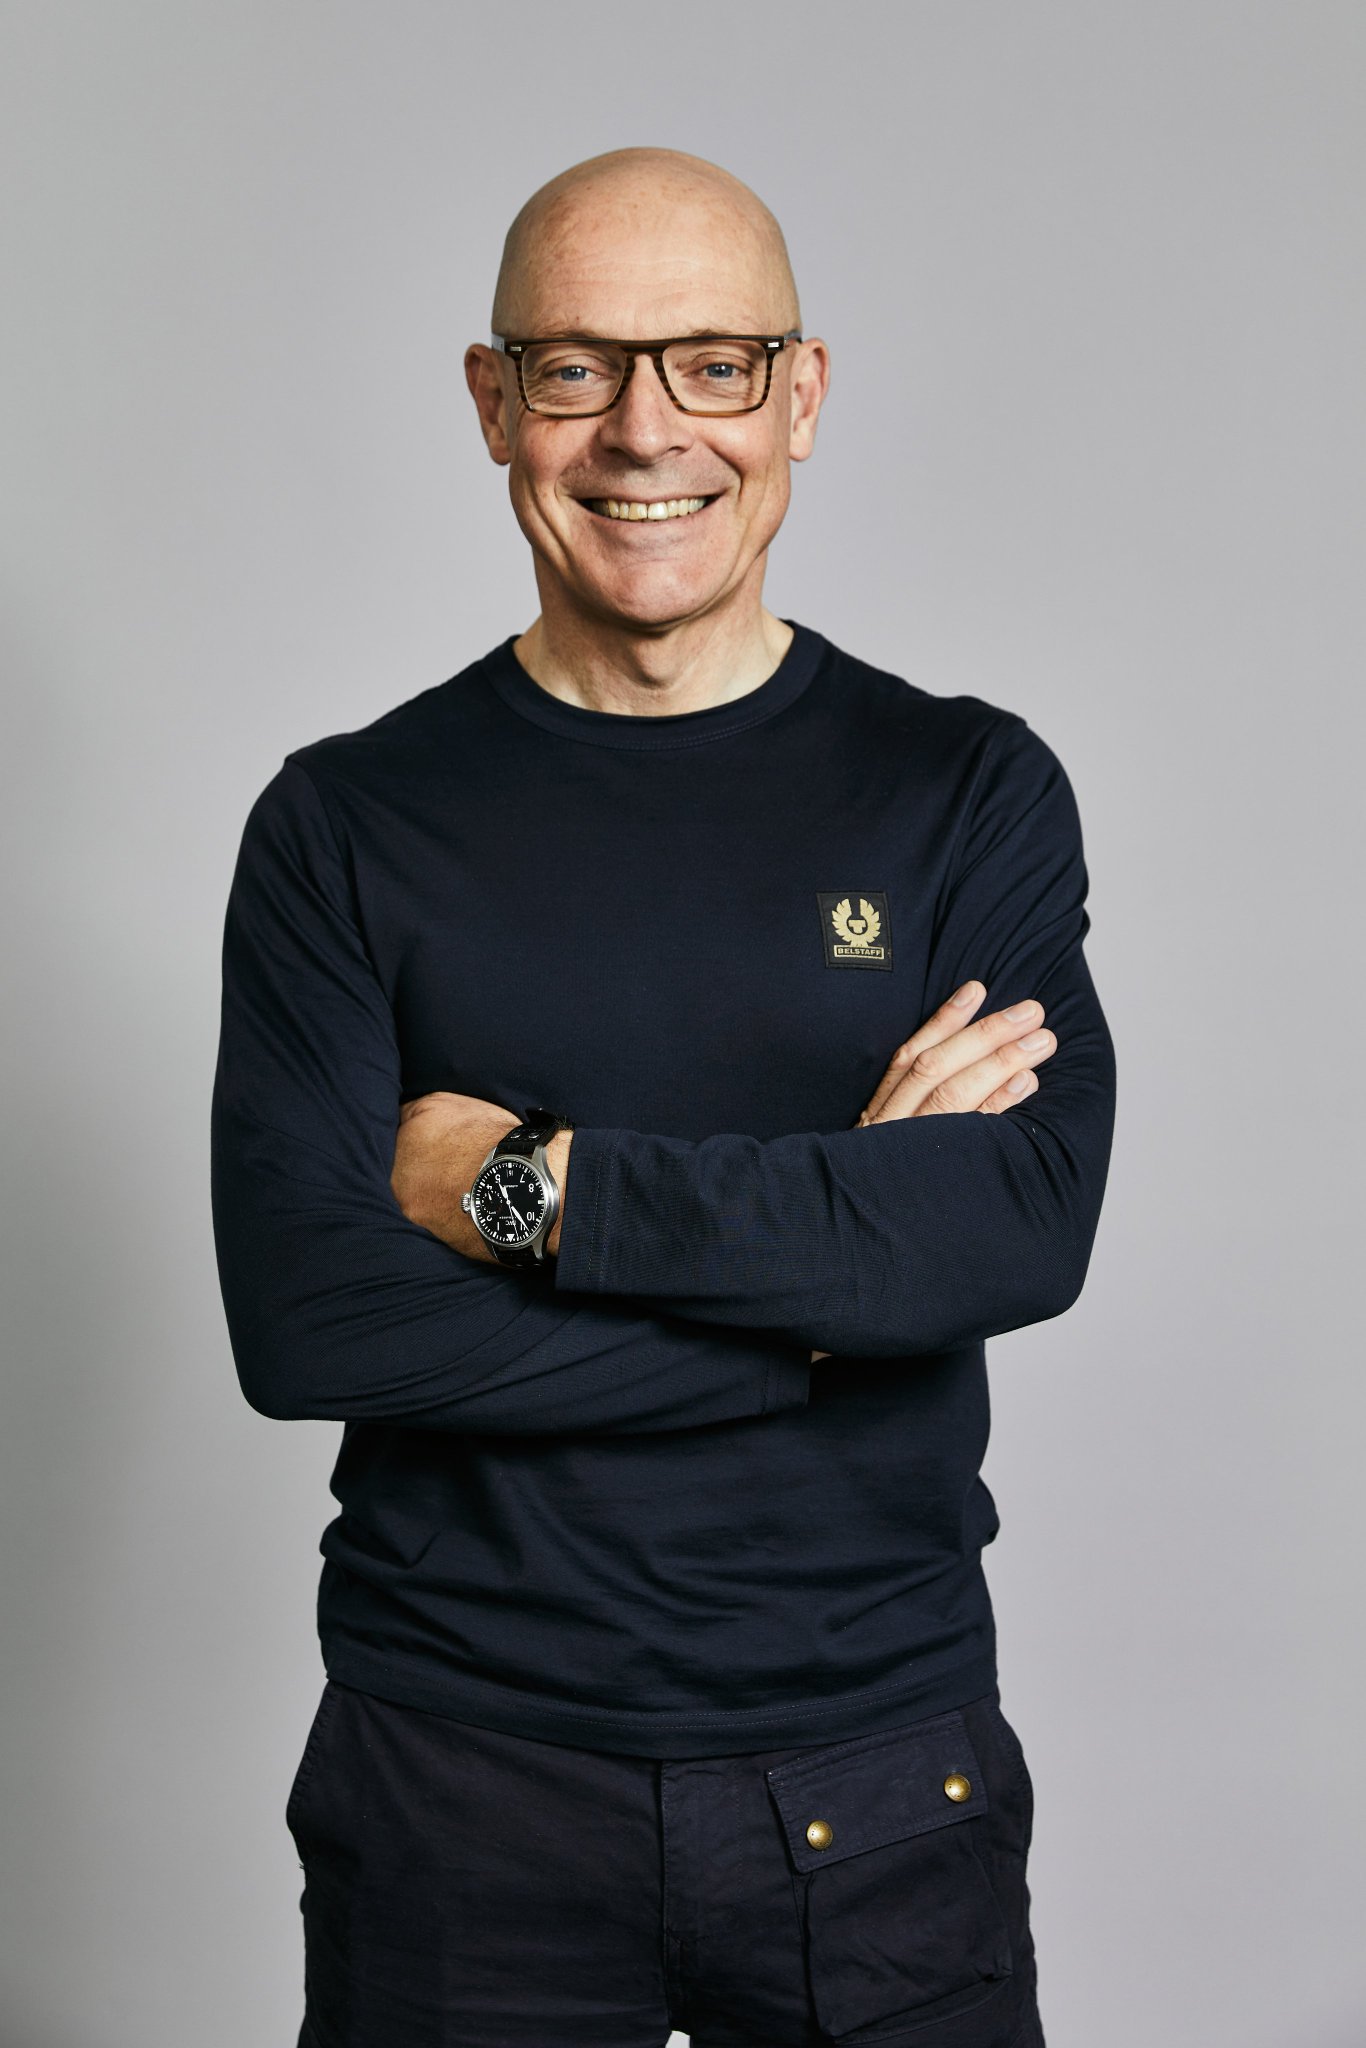 We\d like to wish a very Happy Birthday to Sir Dave Brailsford.

Have a great day boss!  